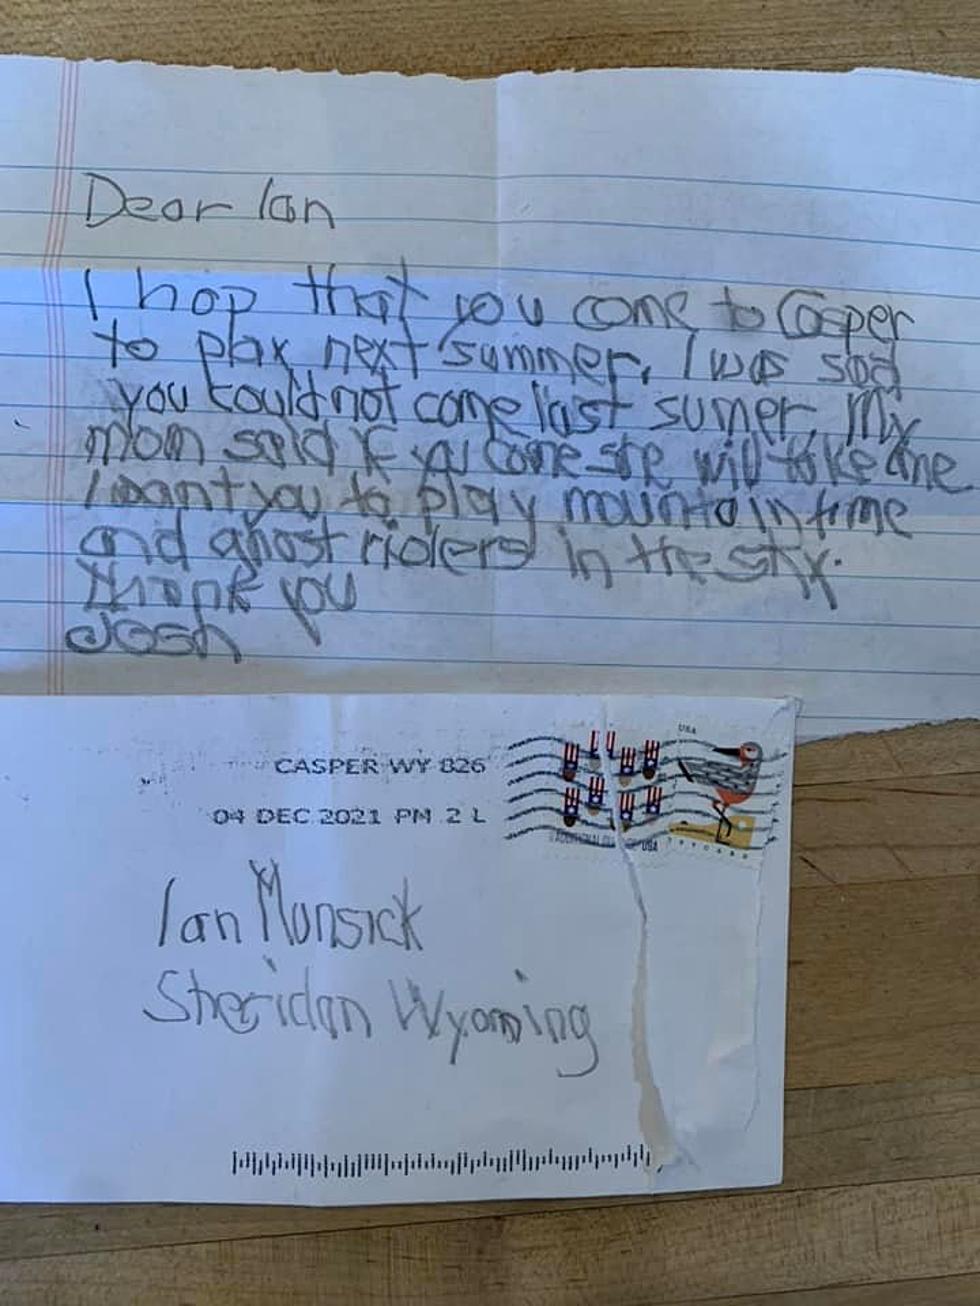 Fan Letter From Wyoming Boy Magically Gets To Ian Munsick With No Address